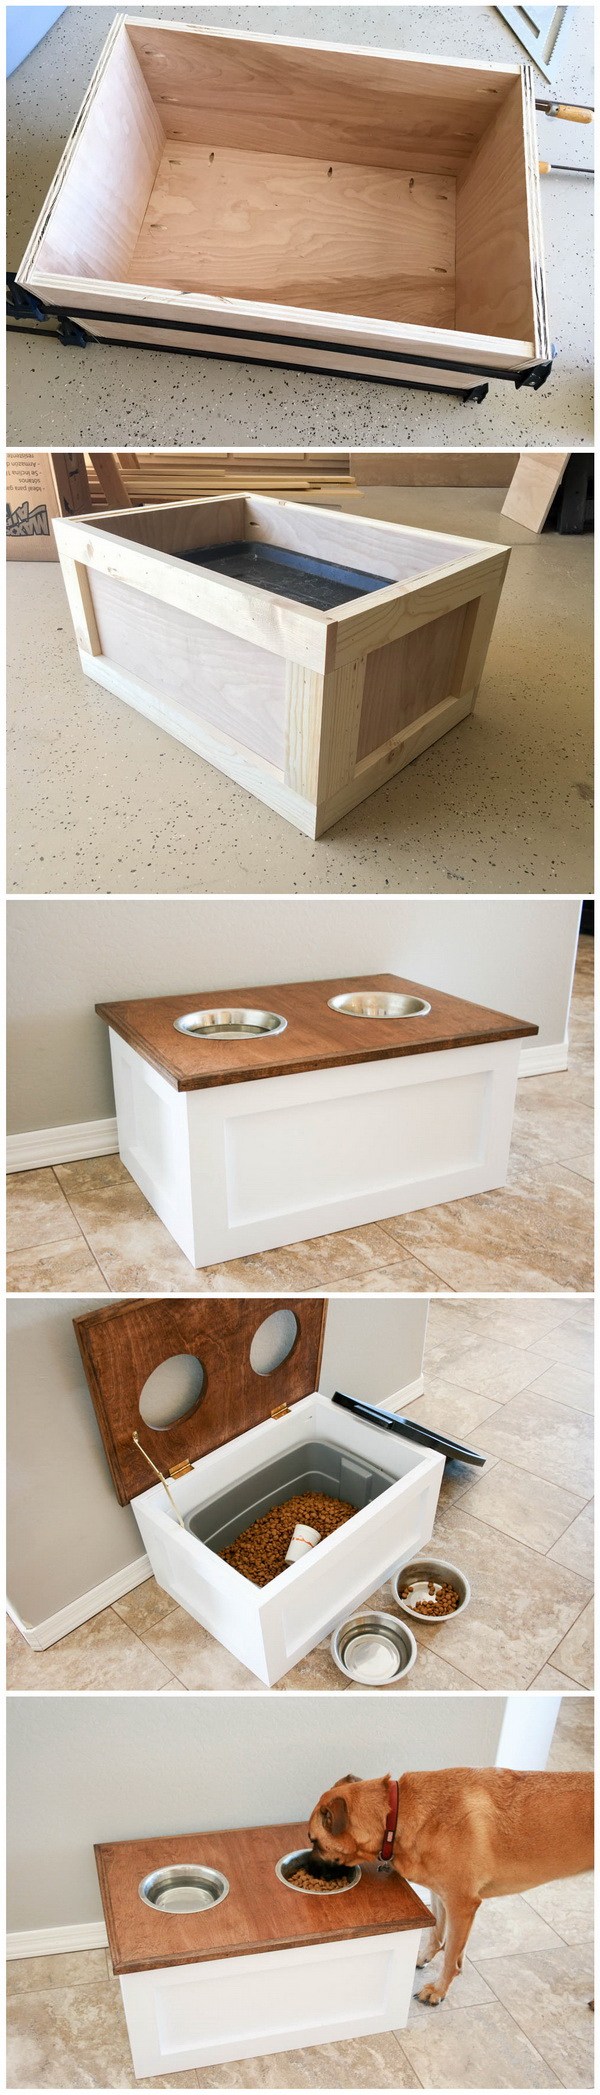 DIY Dog Food Station with Storage: DIY Dog Food Station with Storage underneath! Here is a free plan for you. 